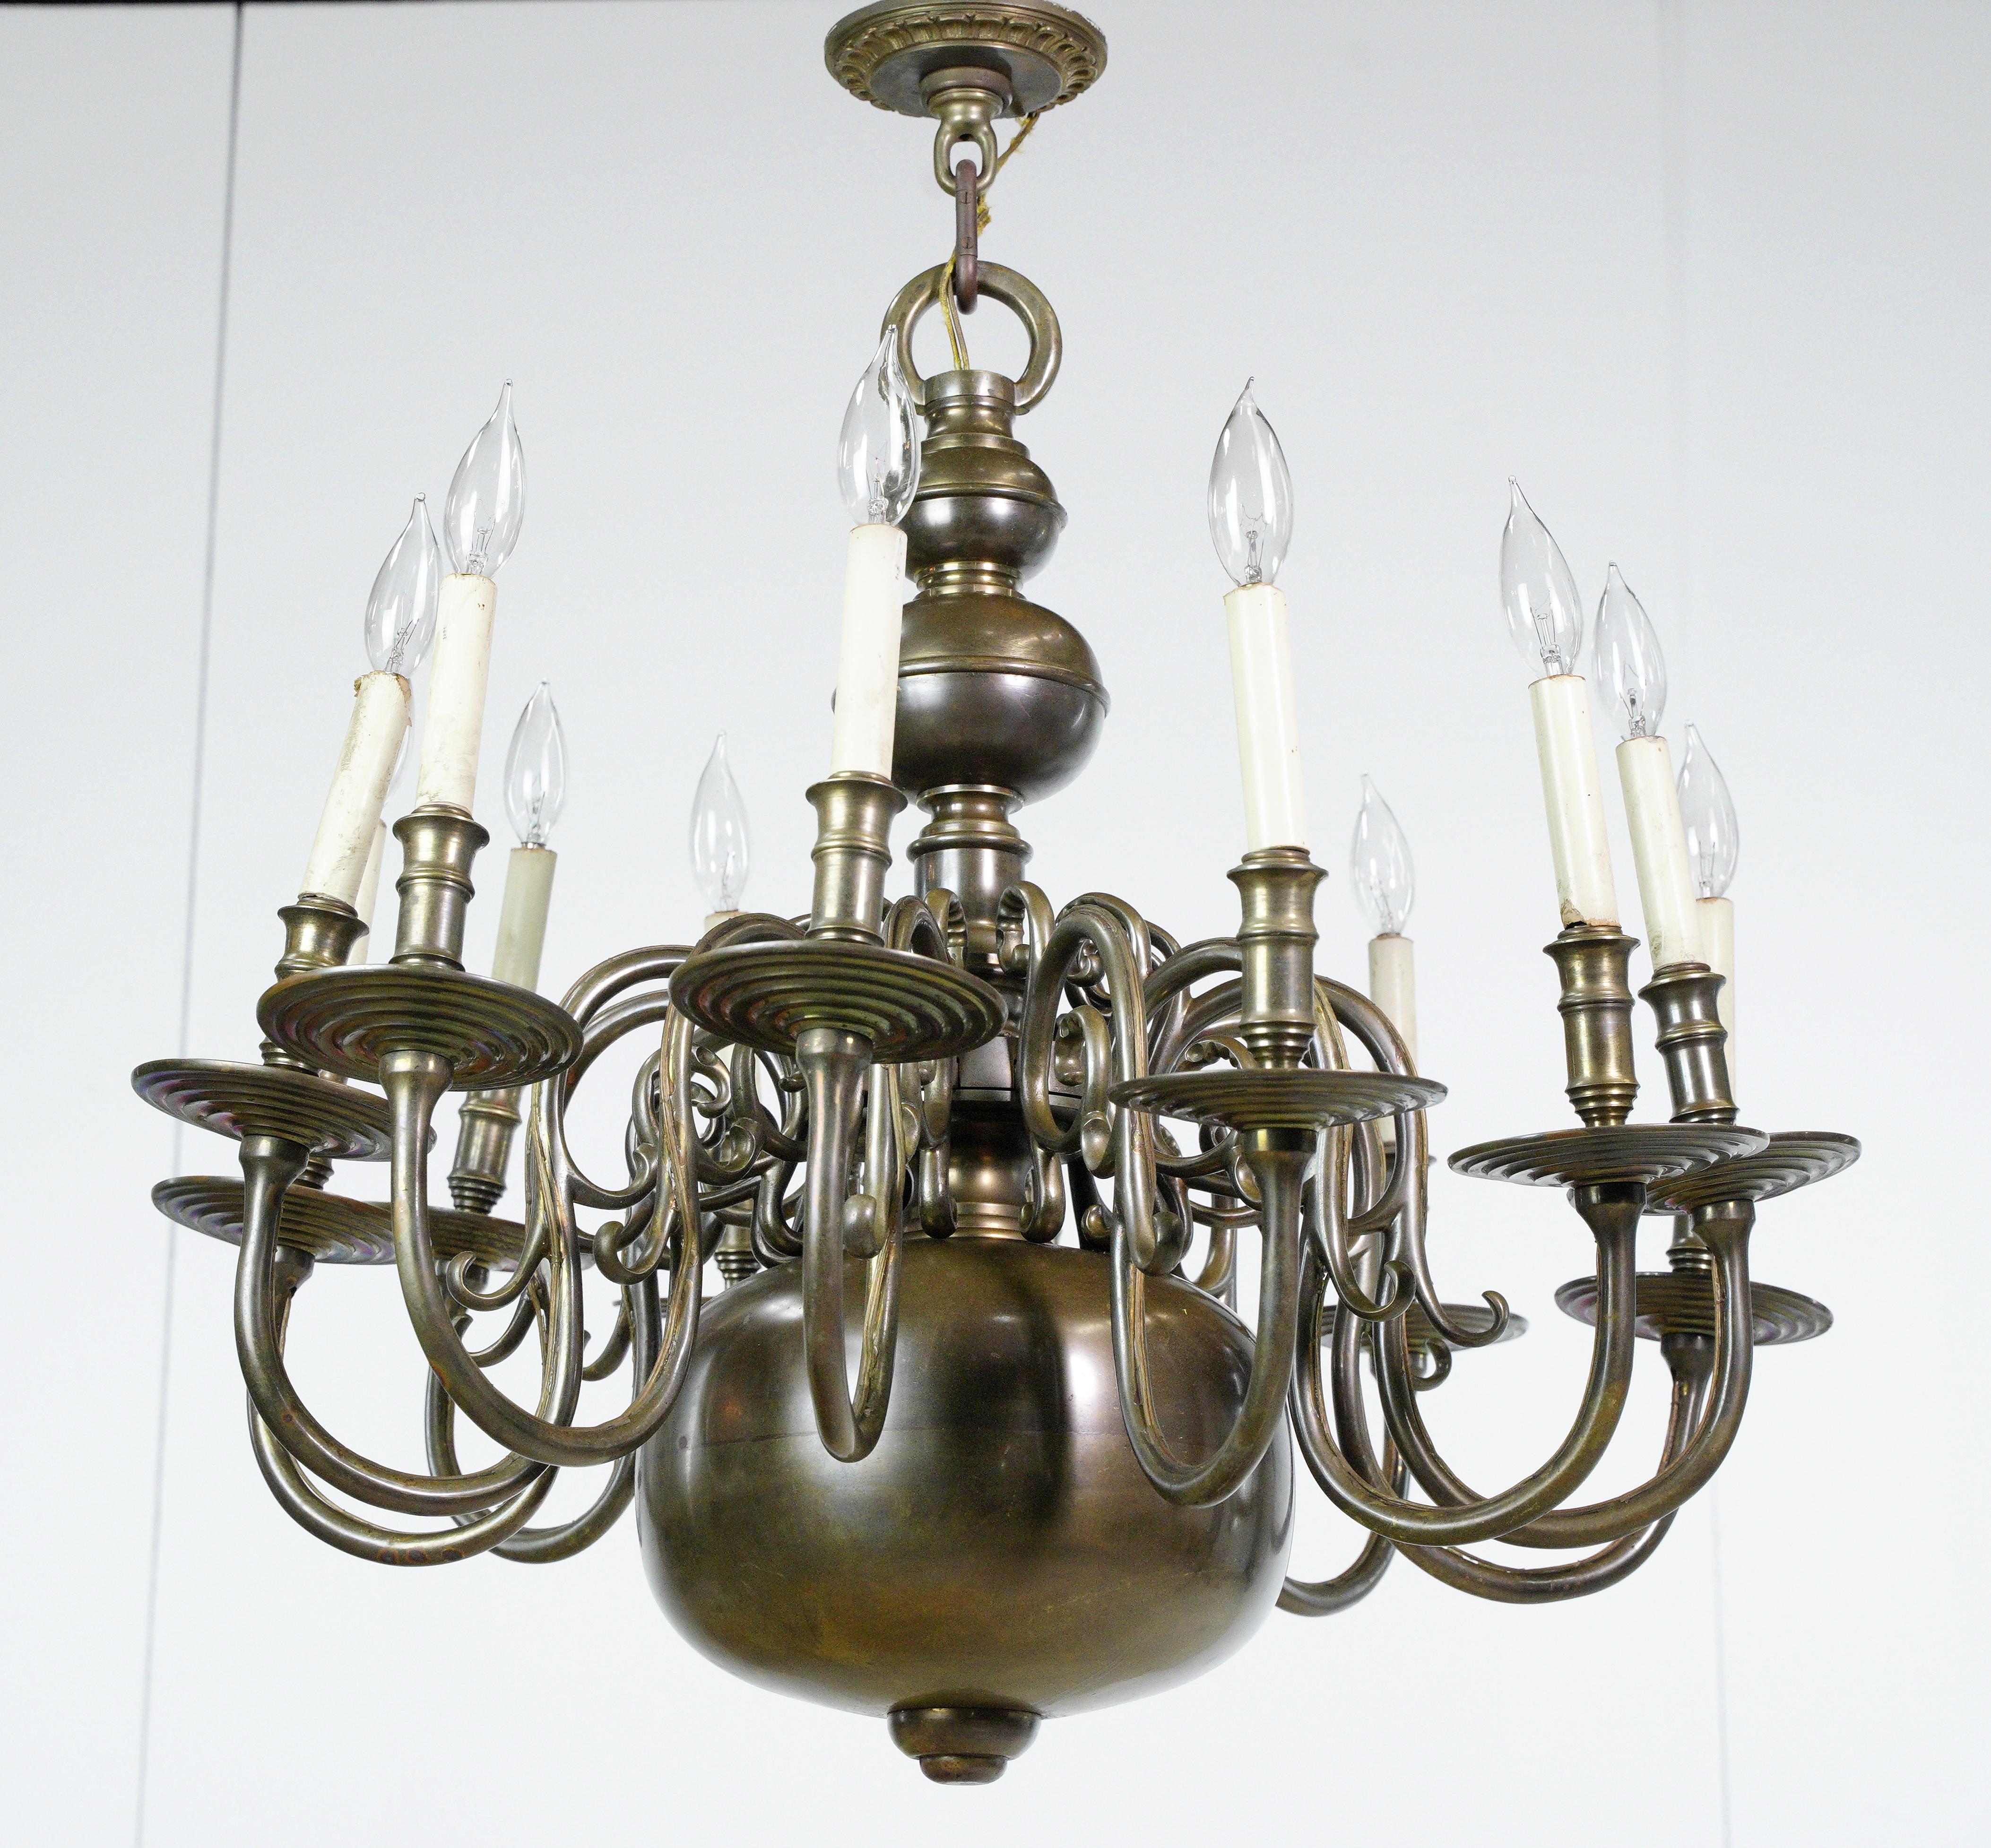 Antique Colonial twelve arm bronze chandelier. Crafted with curled arms and a regal presence, this exquisite piece adds a touch of antique opulence to any room. This is in good antique condition with some surface wear. The price includes restoration